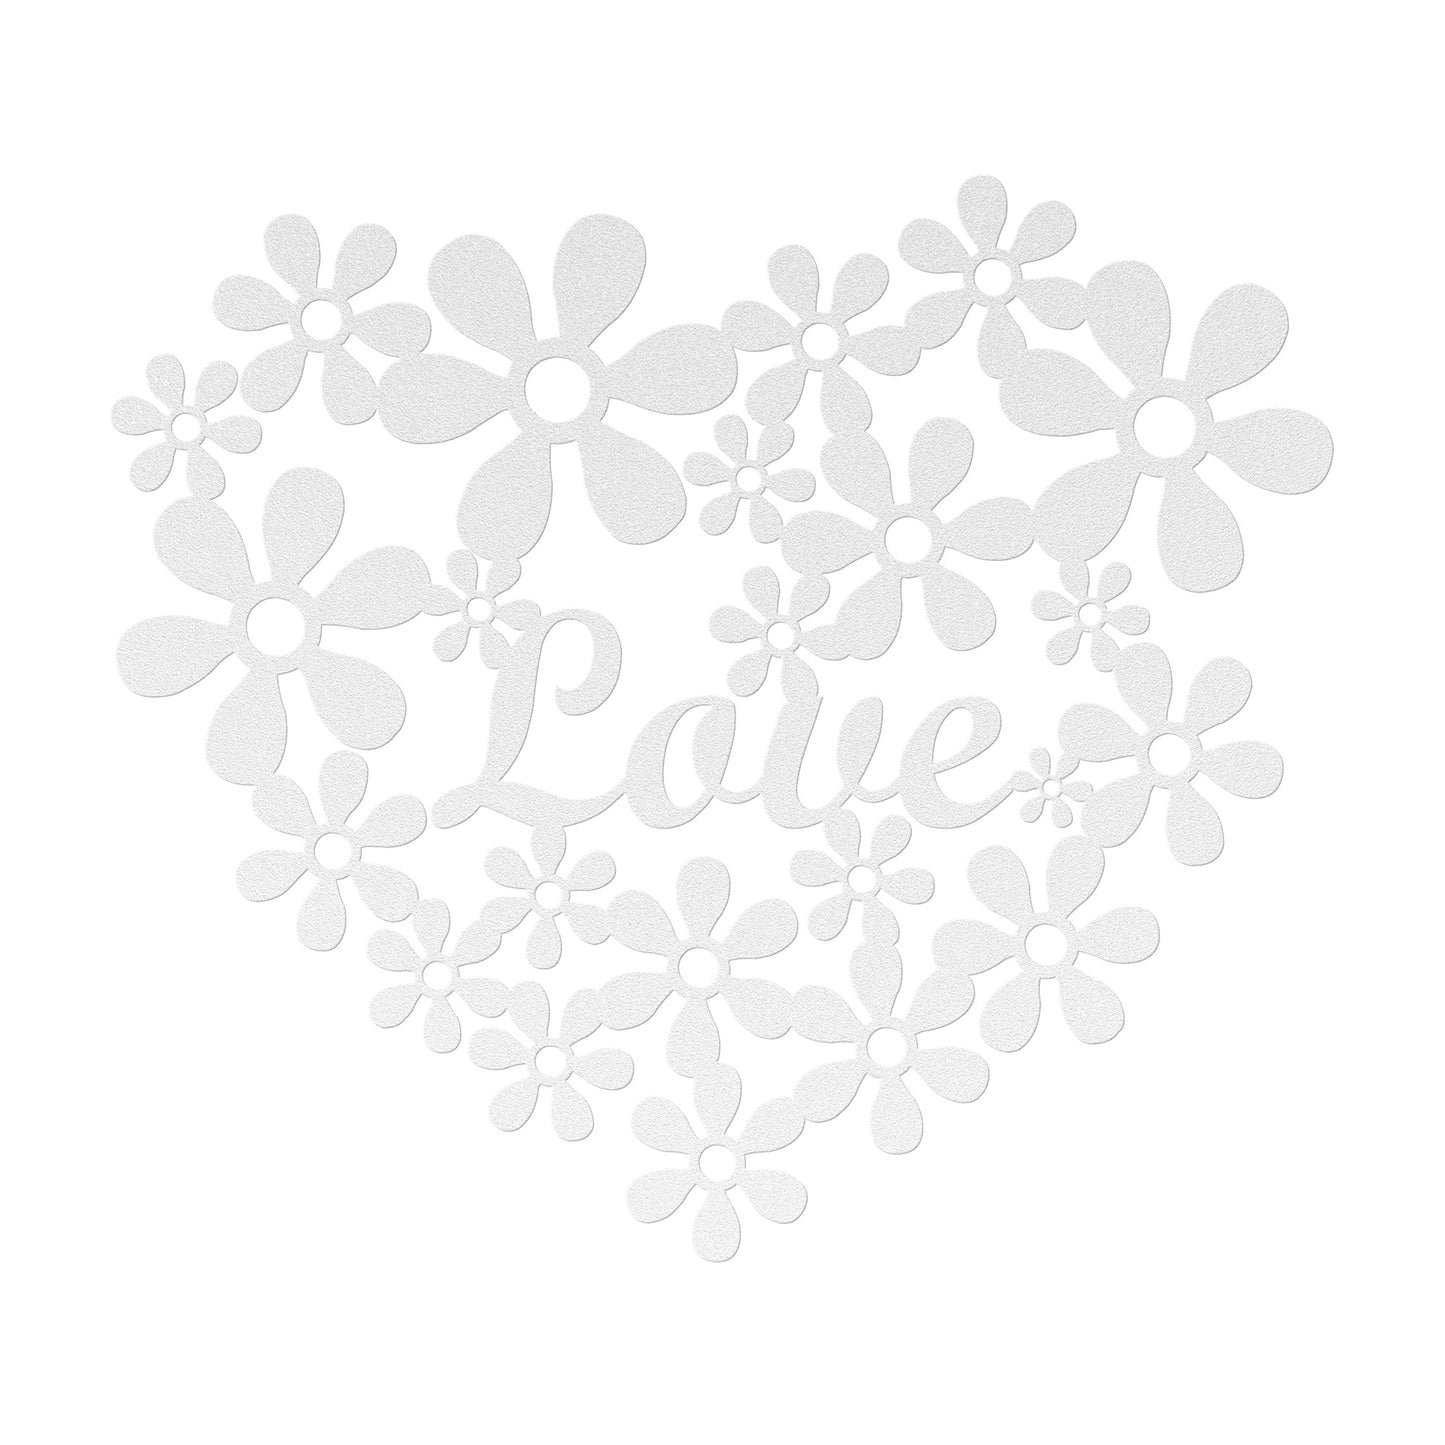 Love Daisies Metal Sign | Metal Wall Decor Love Daisies | For any occasion, Mother’s Day, Father’s Day, Birthday, anniversary, wedding, housewarming, closing gift